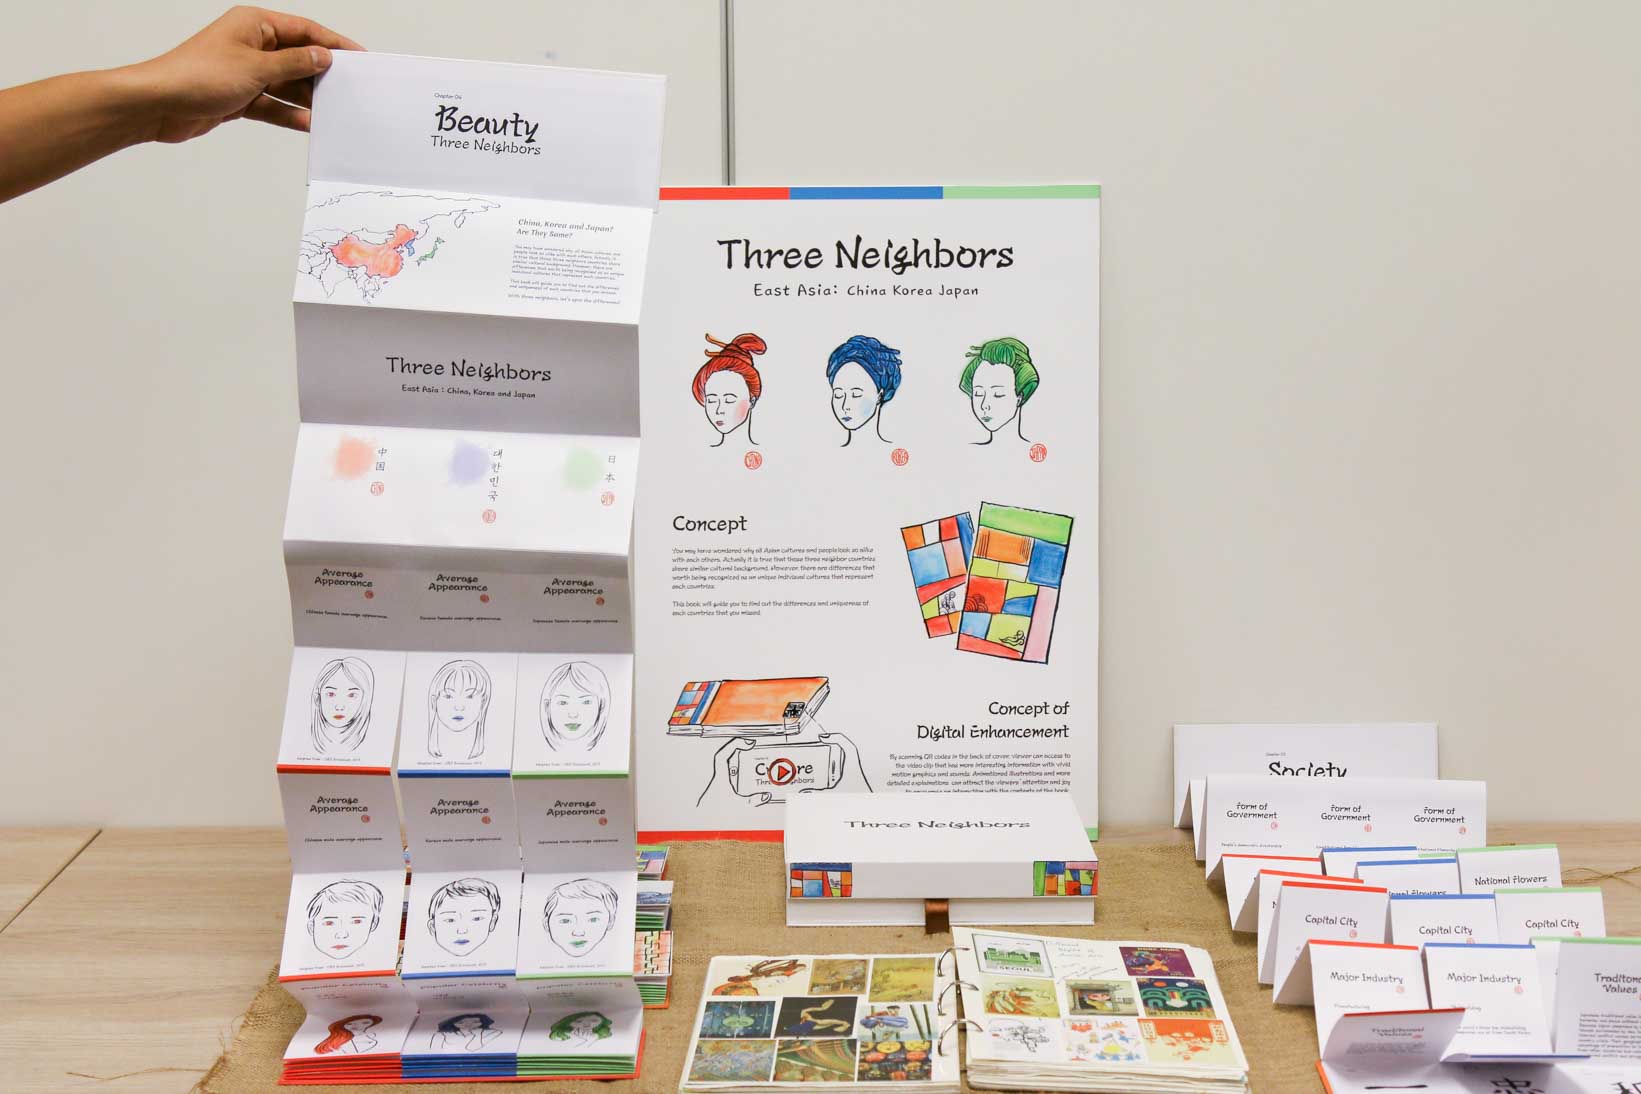 Photo: One of the projects, ‘3 neighbours’, is a creative guidebook that highlights the differentiating traits between three Asian countries: Japan, China and Korea.